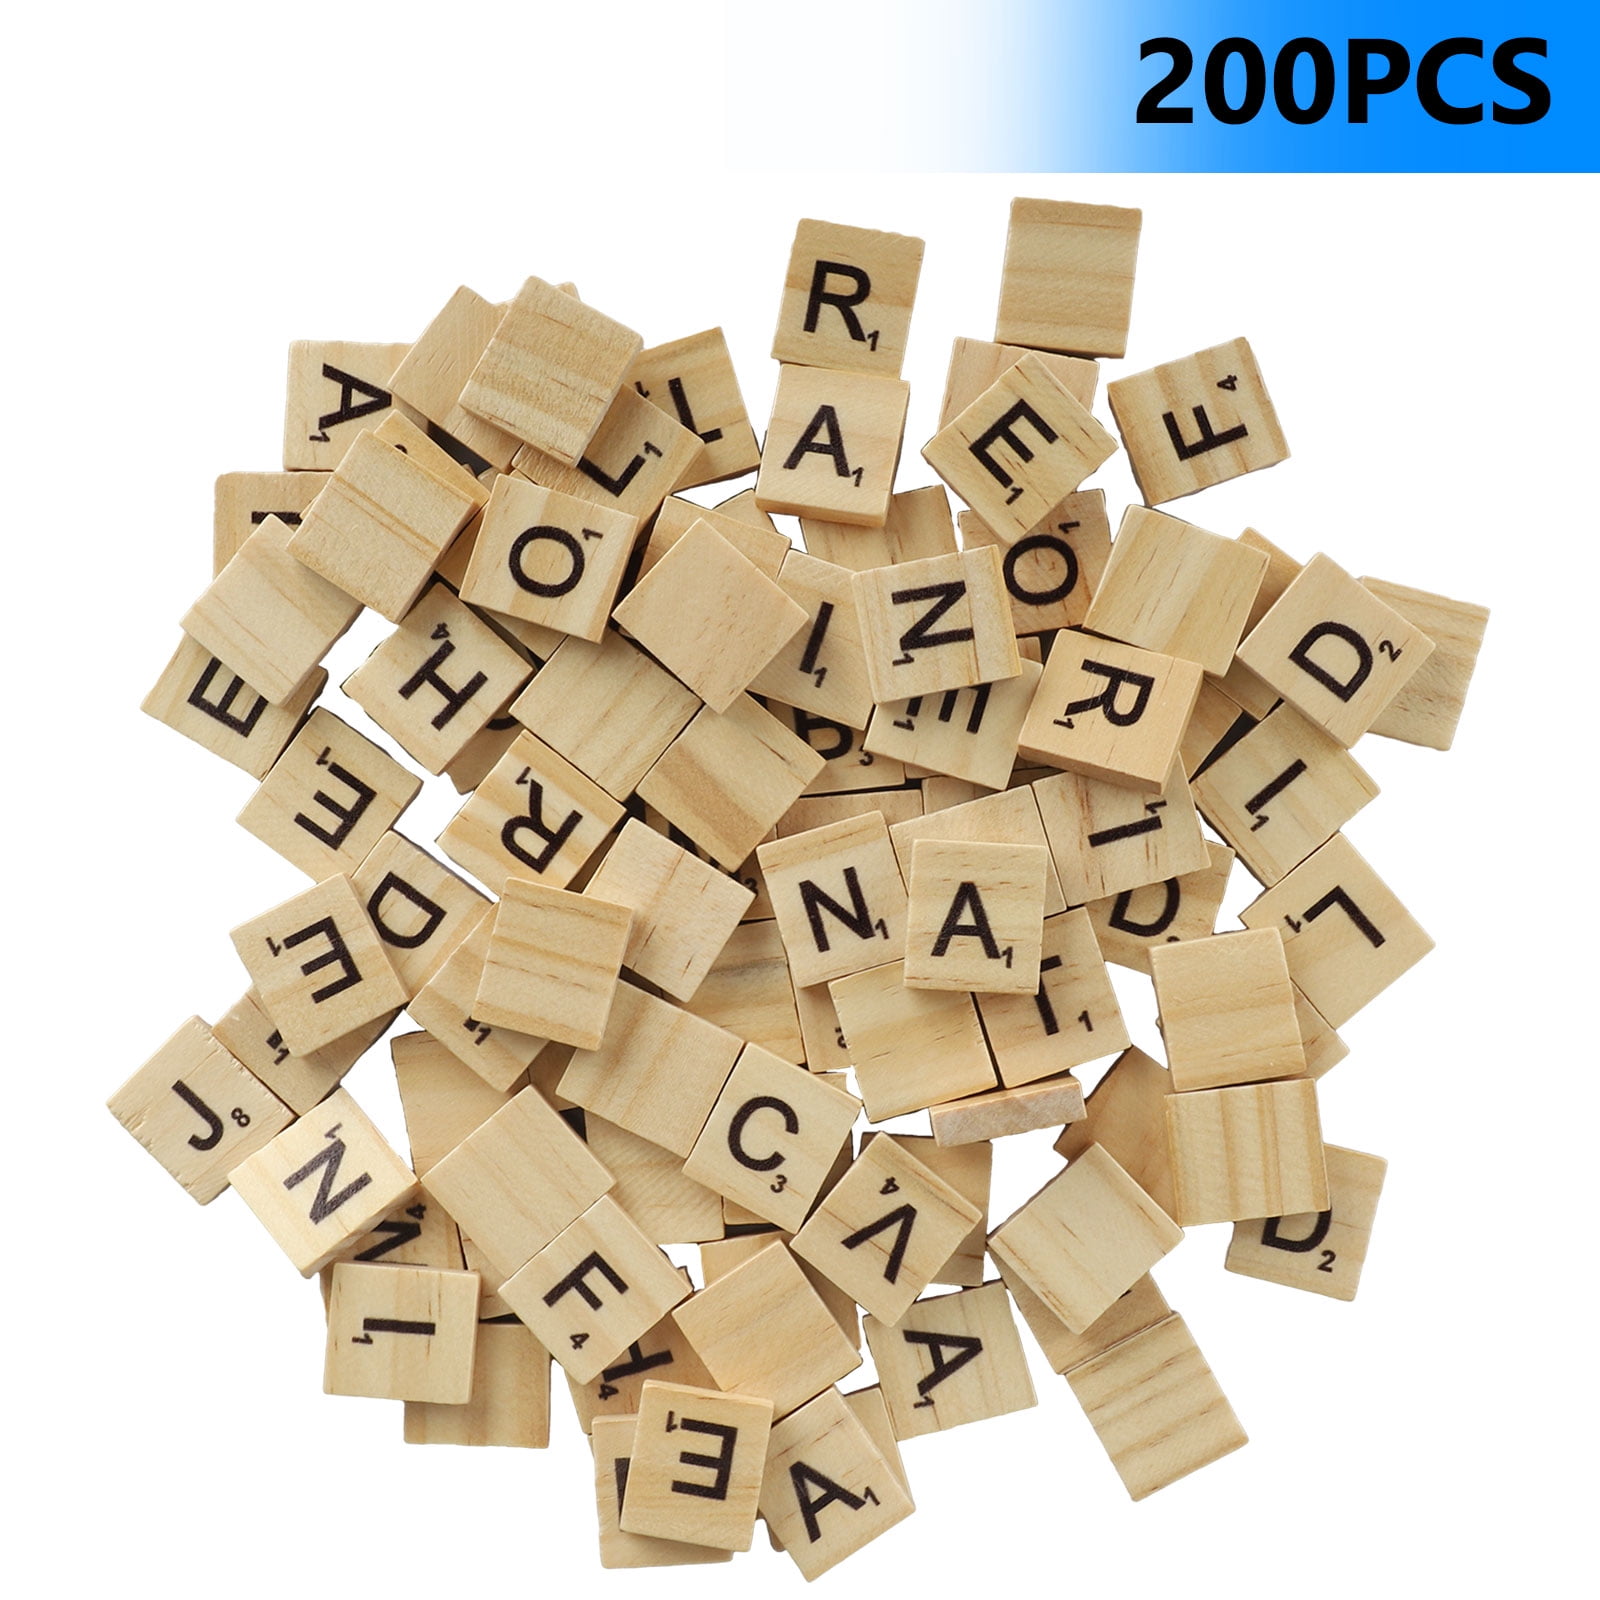 100 Genuine Scrabble Wood Letter Tiles Complete Set Crafts/Replacement 